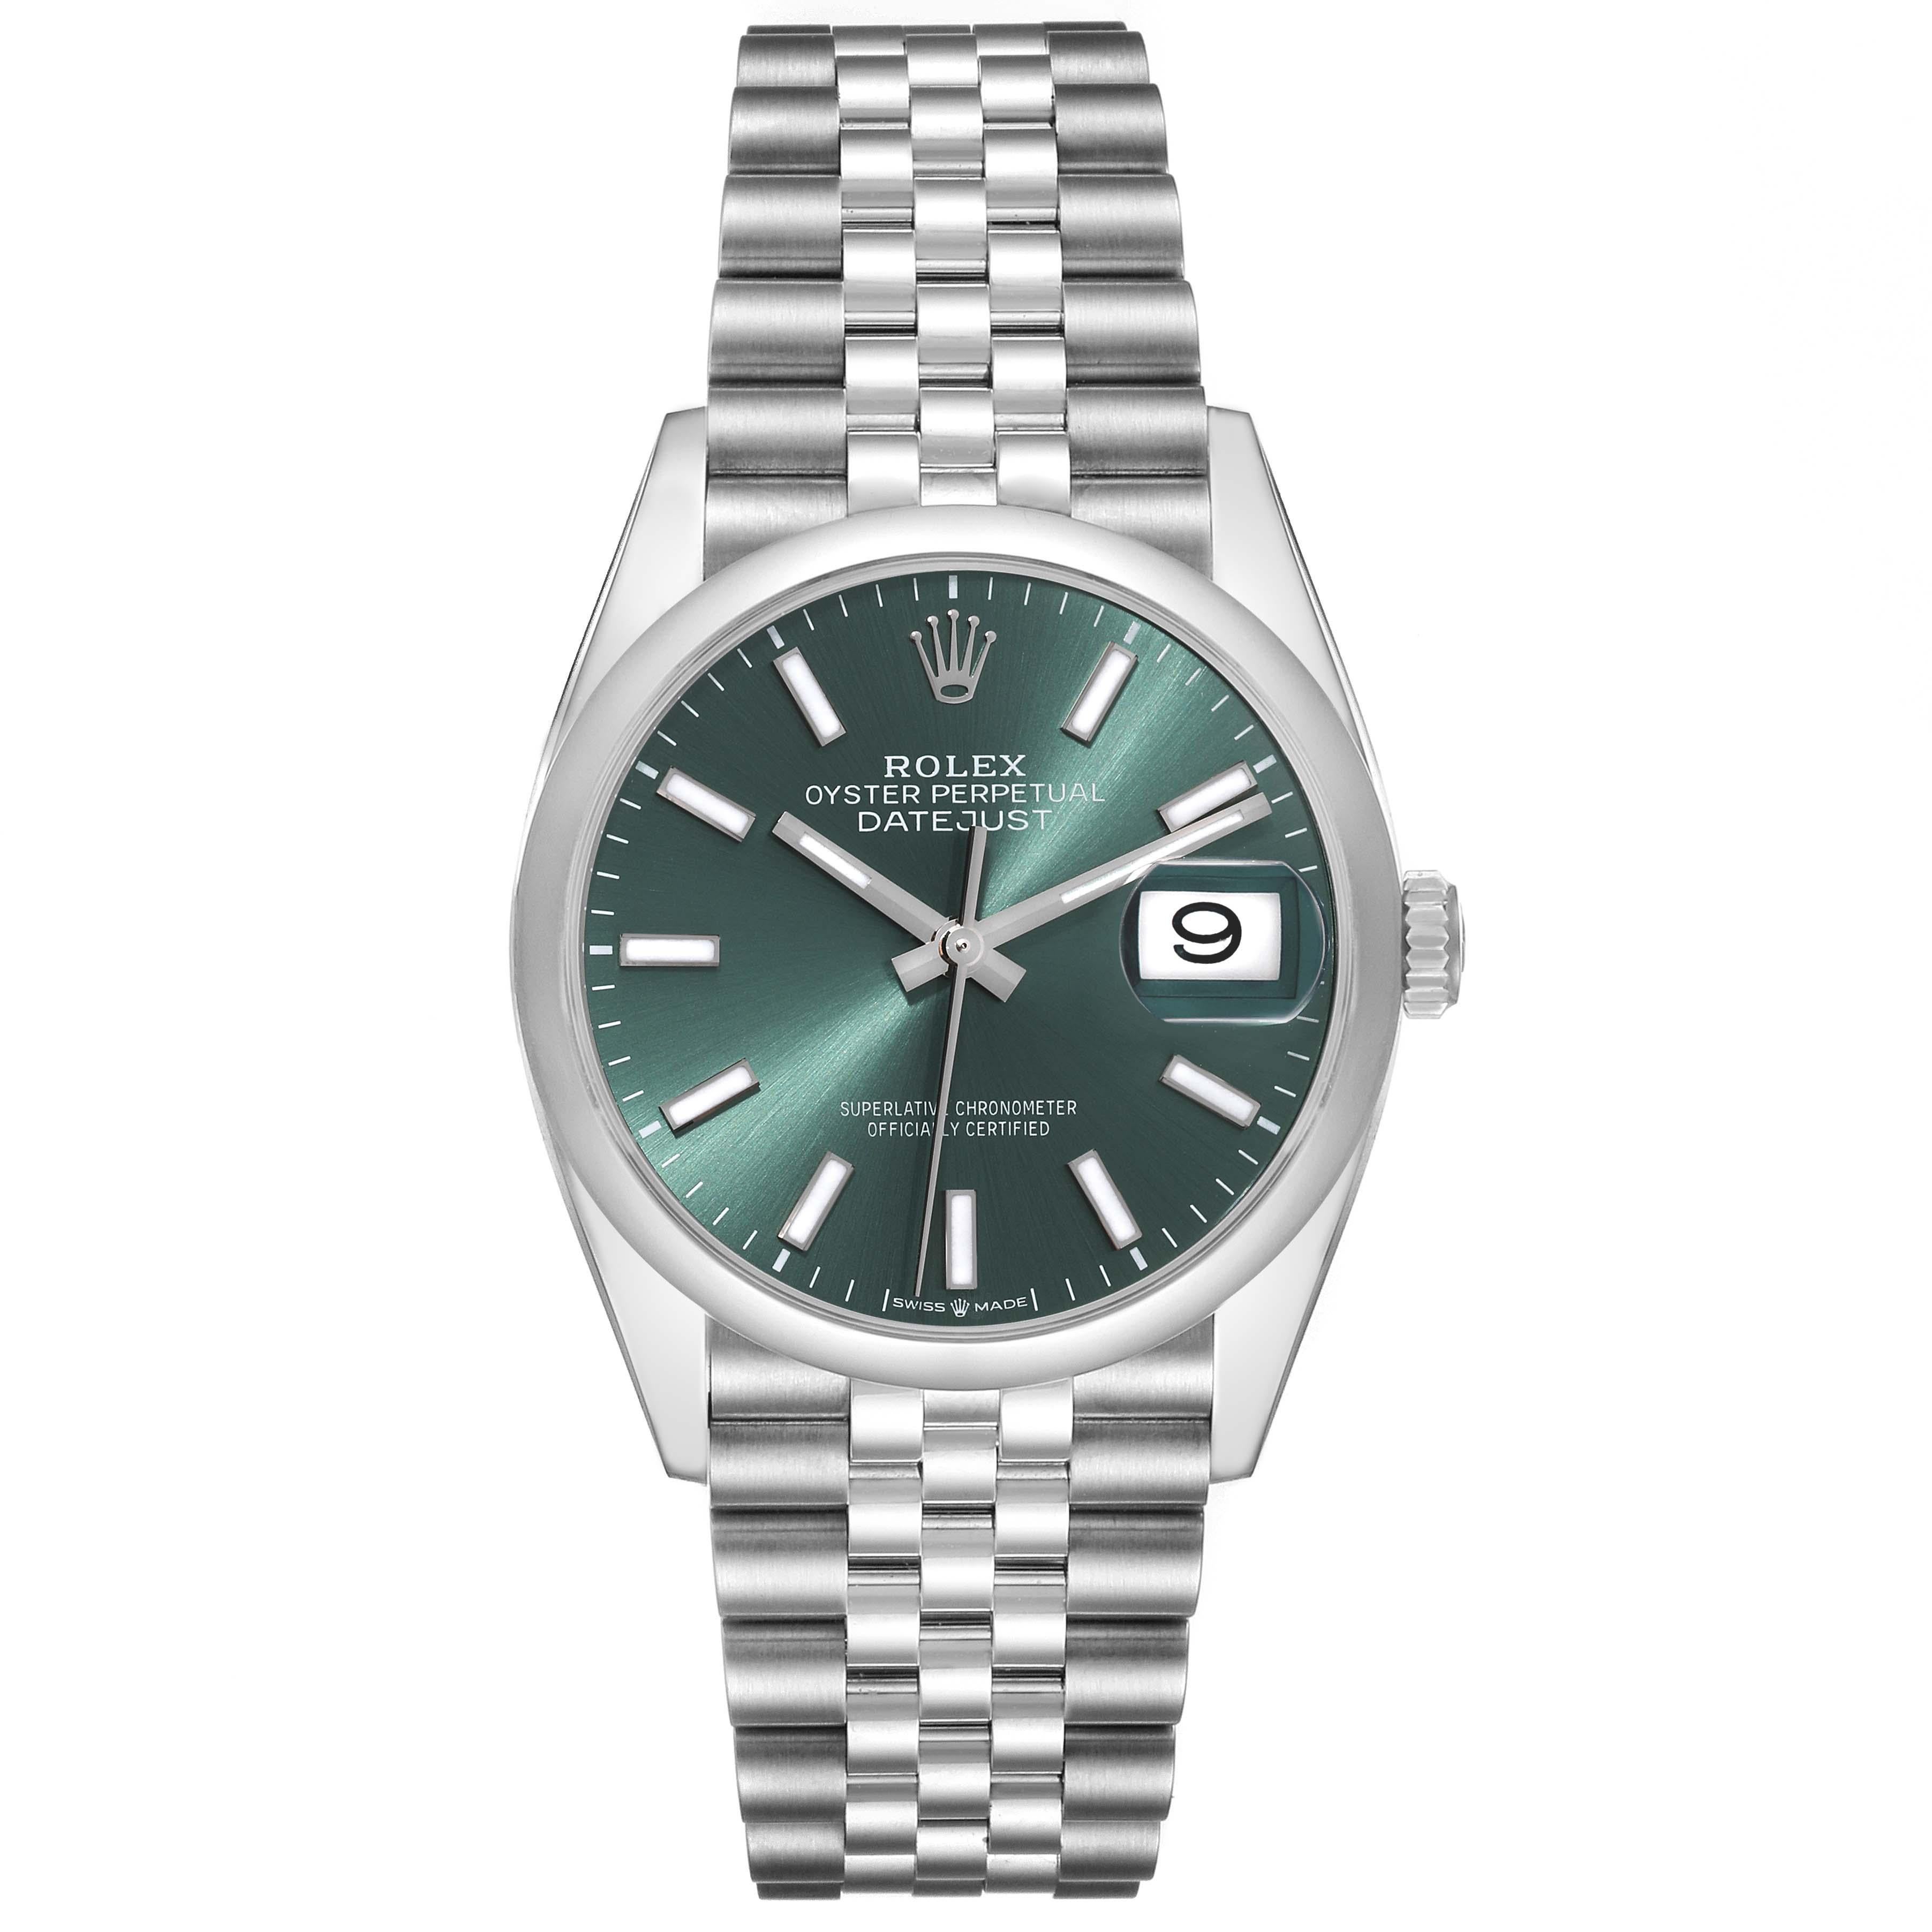 Rolex Datejust 36 Mint Green Dial Steel Mens Watch 126200 Box Card. Officially certified chronometer self-winding movement. Stainless steel case 36.0 mm in diameter. Rolex logo on a crown. Stainless steel smooth domed bezel. Scratch resistant